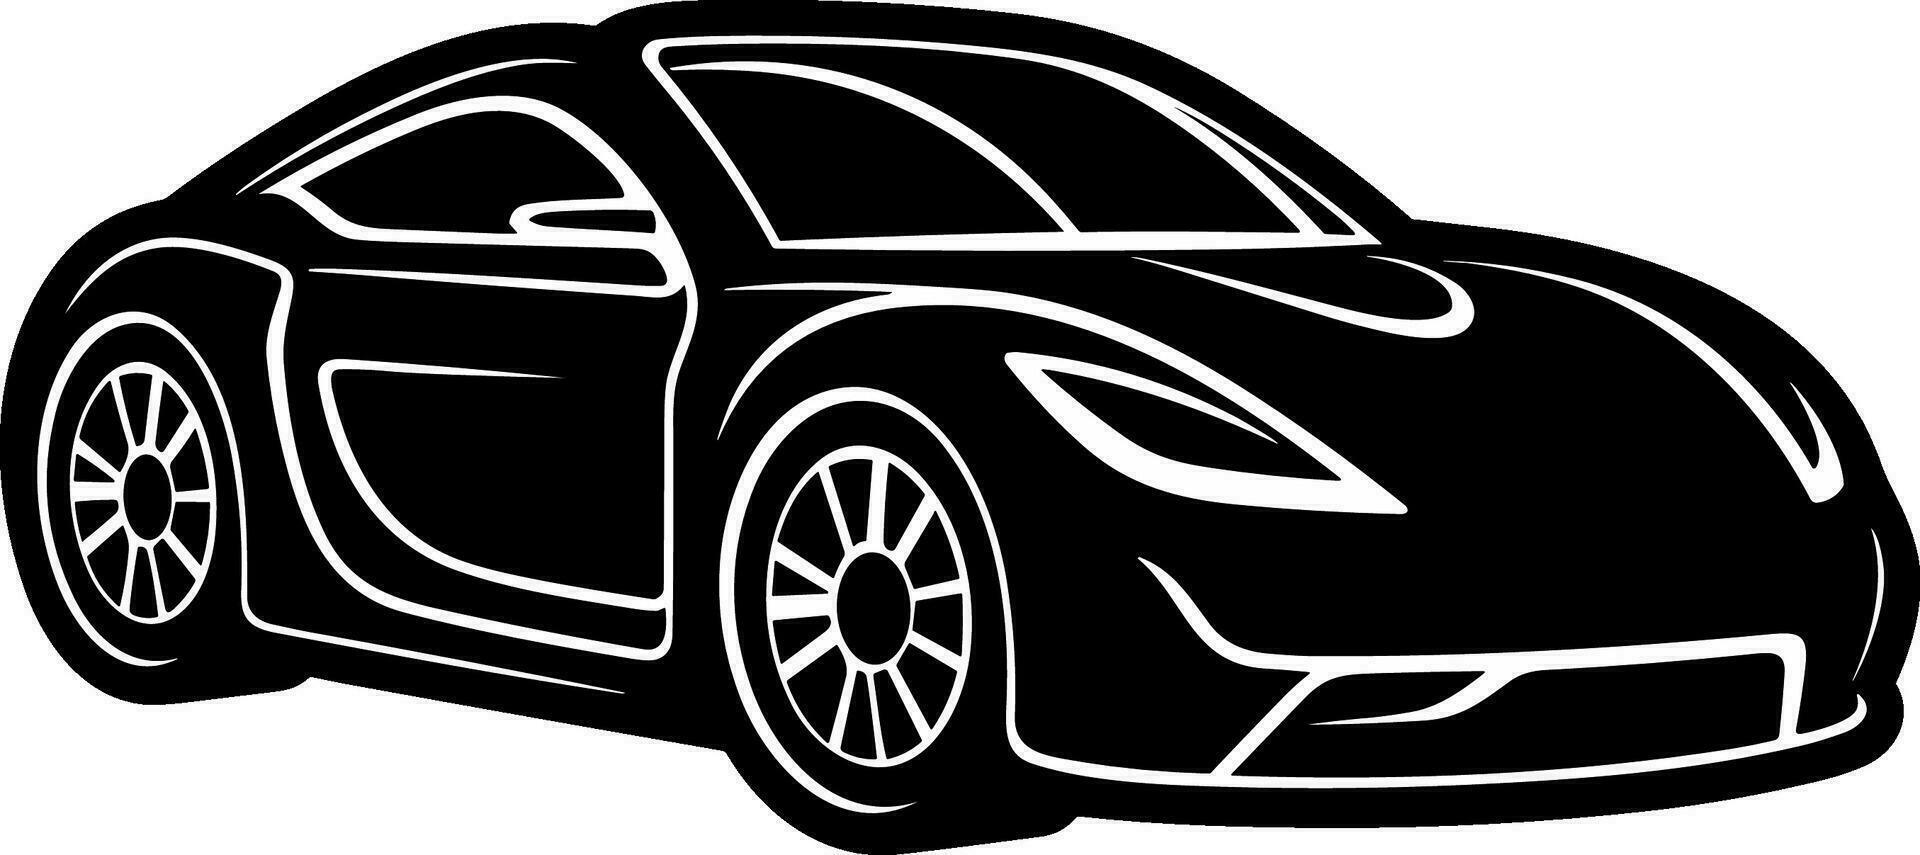 sport car, race car icon vector illustration icon flat style isolate on background